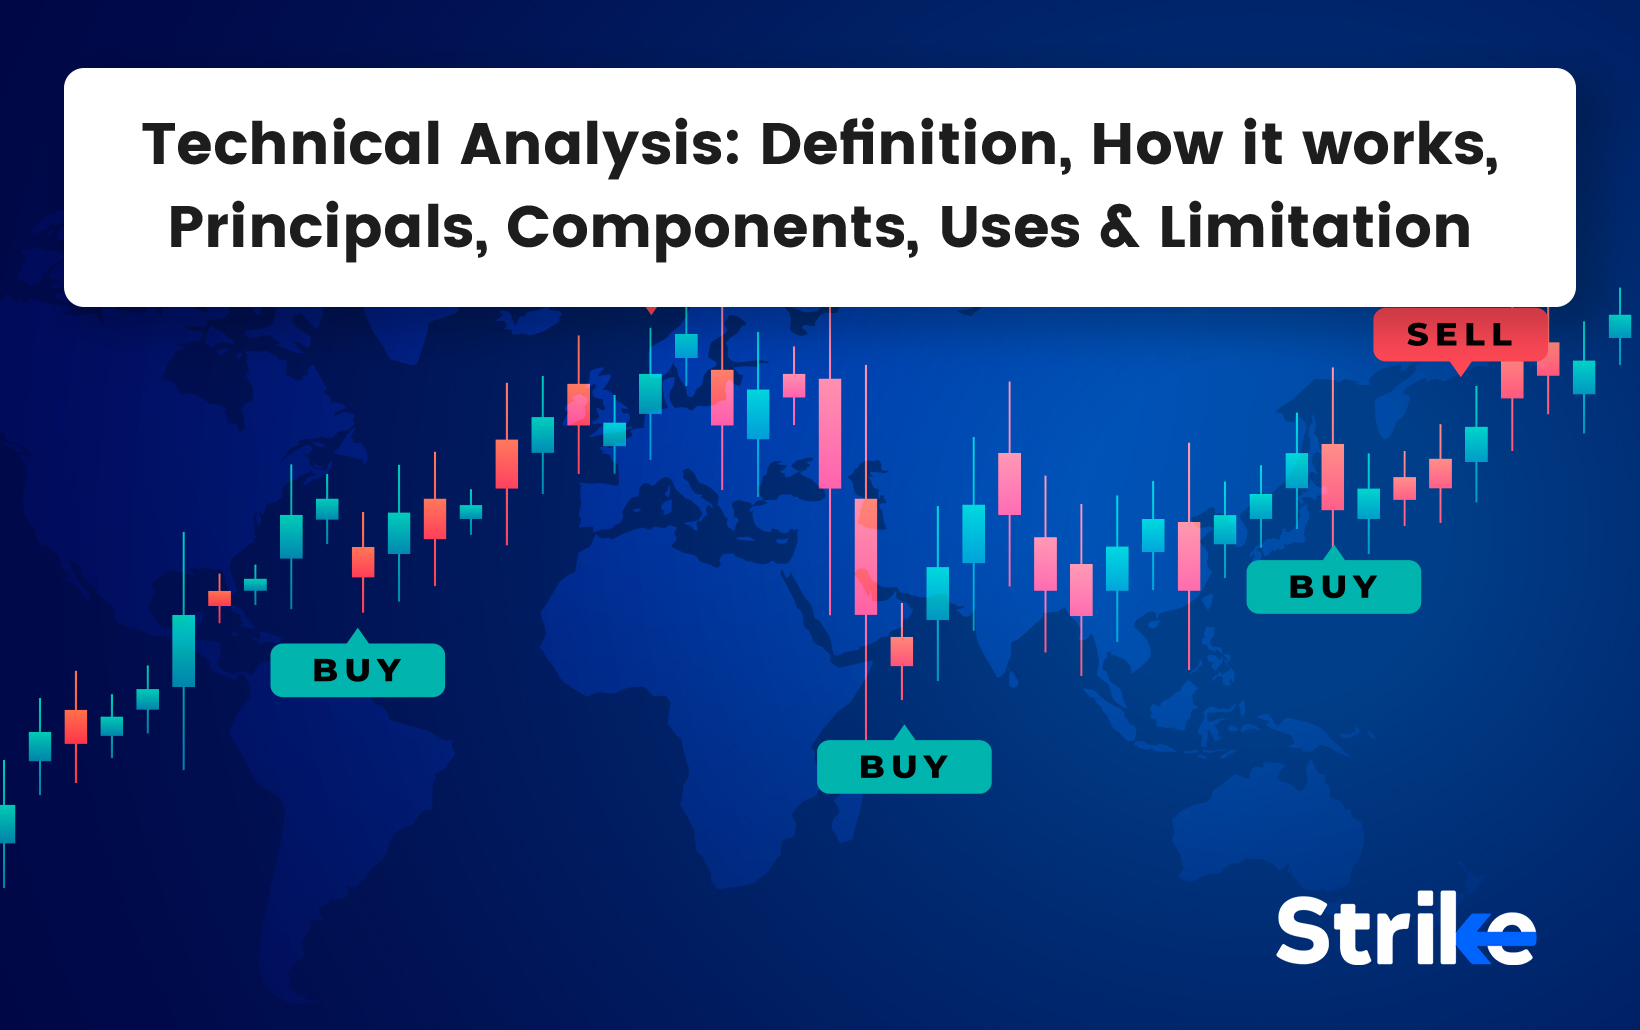 Technical Analysis: Definition, How it works, Principals, Components